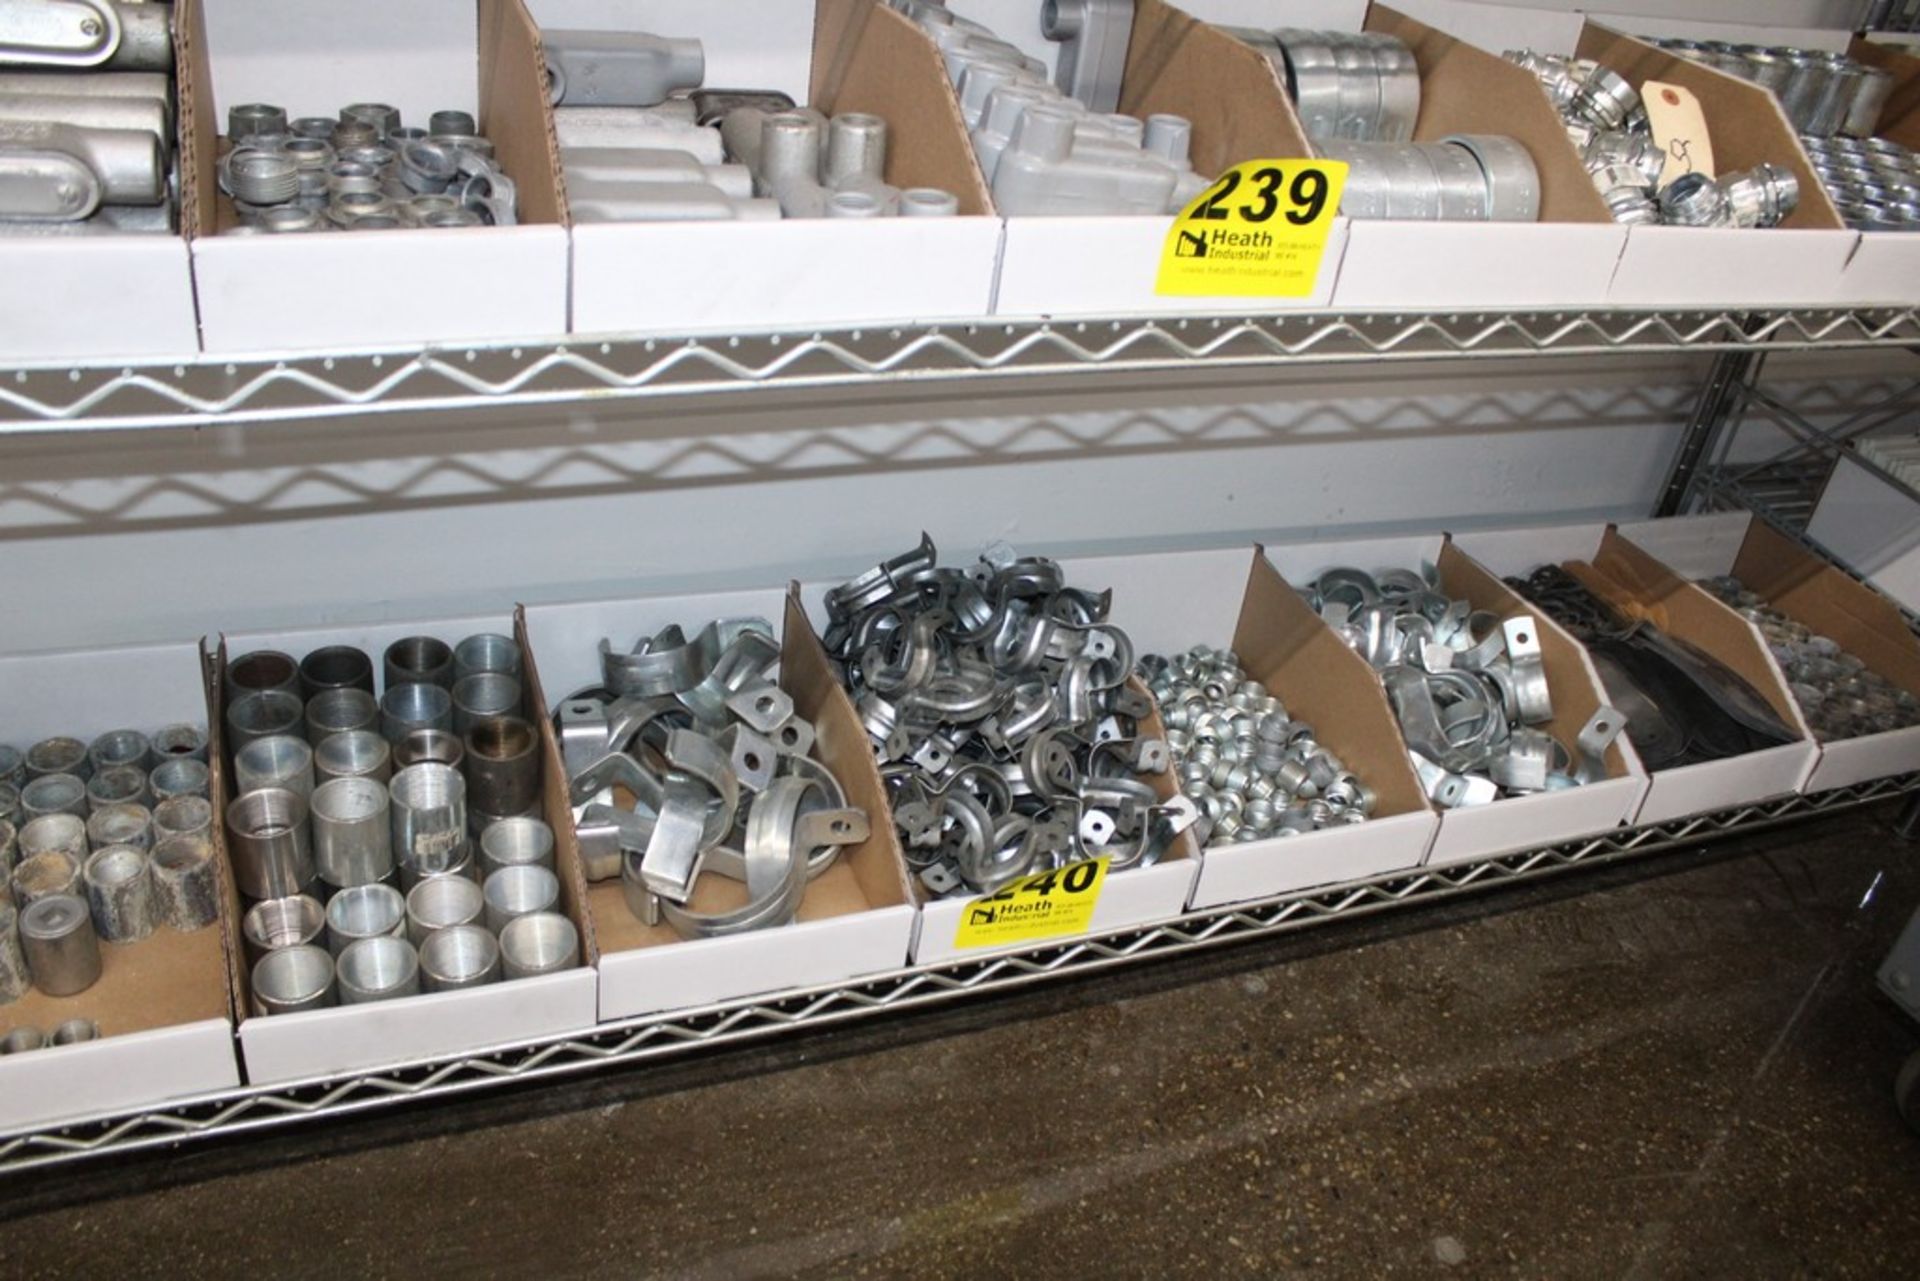 ASSORTED CONDUIT HANGERS AND THREADED FITTINGS ON SHELF